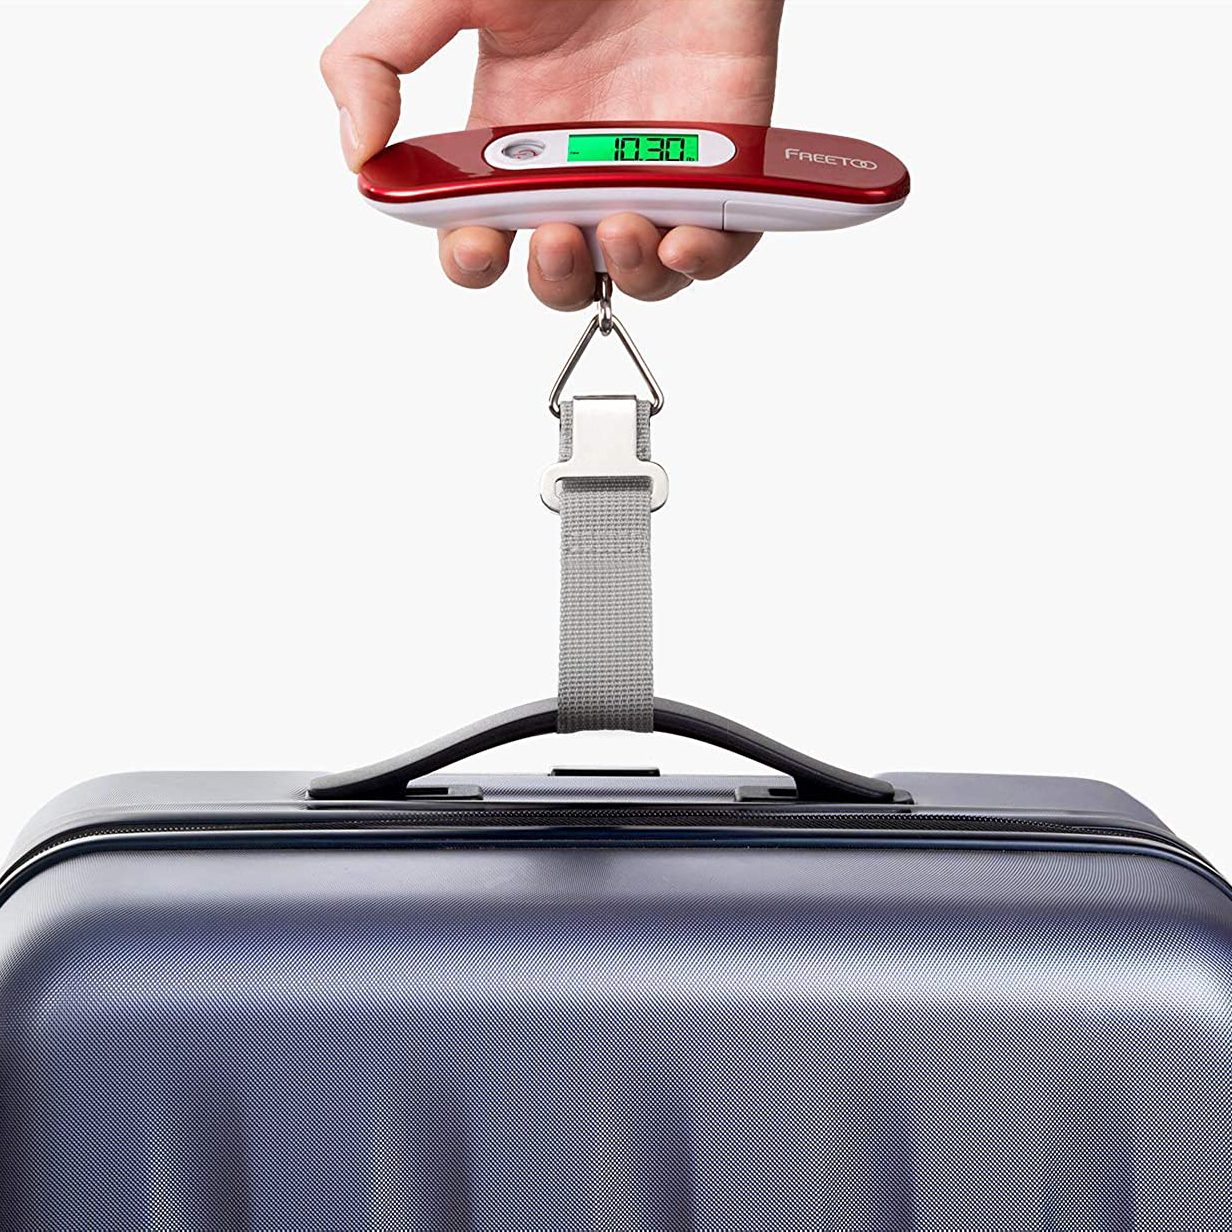 Freetoo Luggage Scale Portable Digital Weight Scale For Travel Suitcase  Weigher With Tare Function L